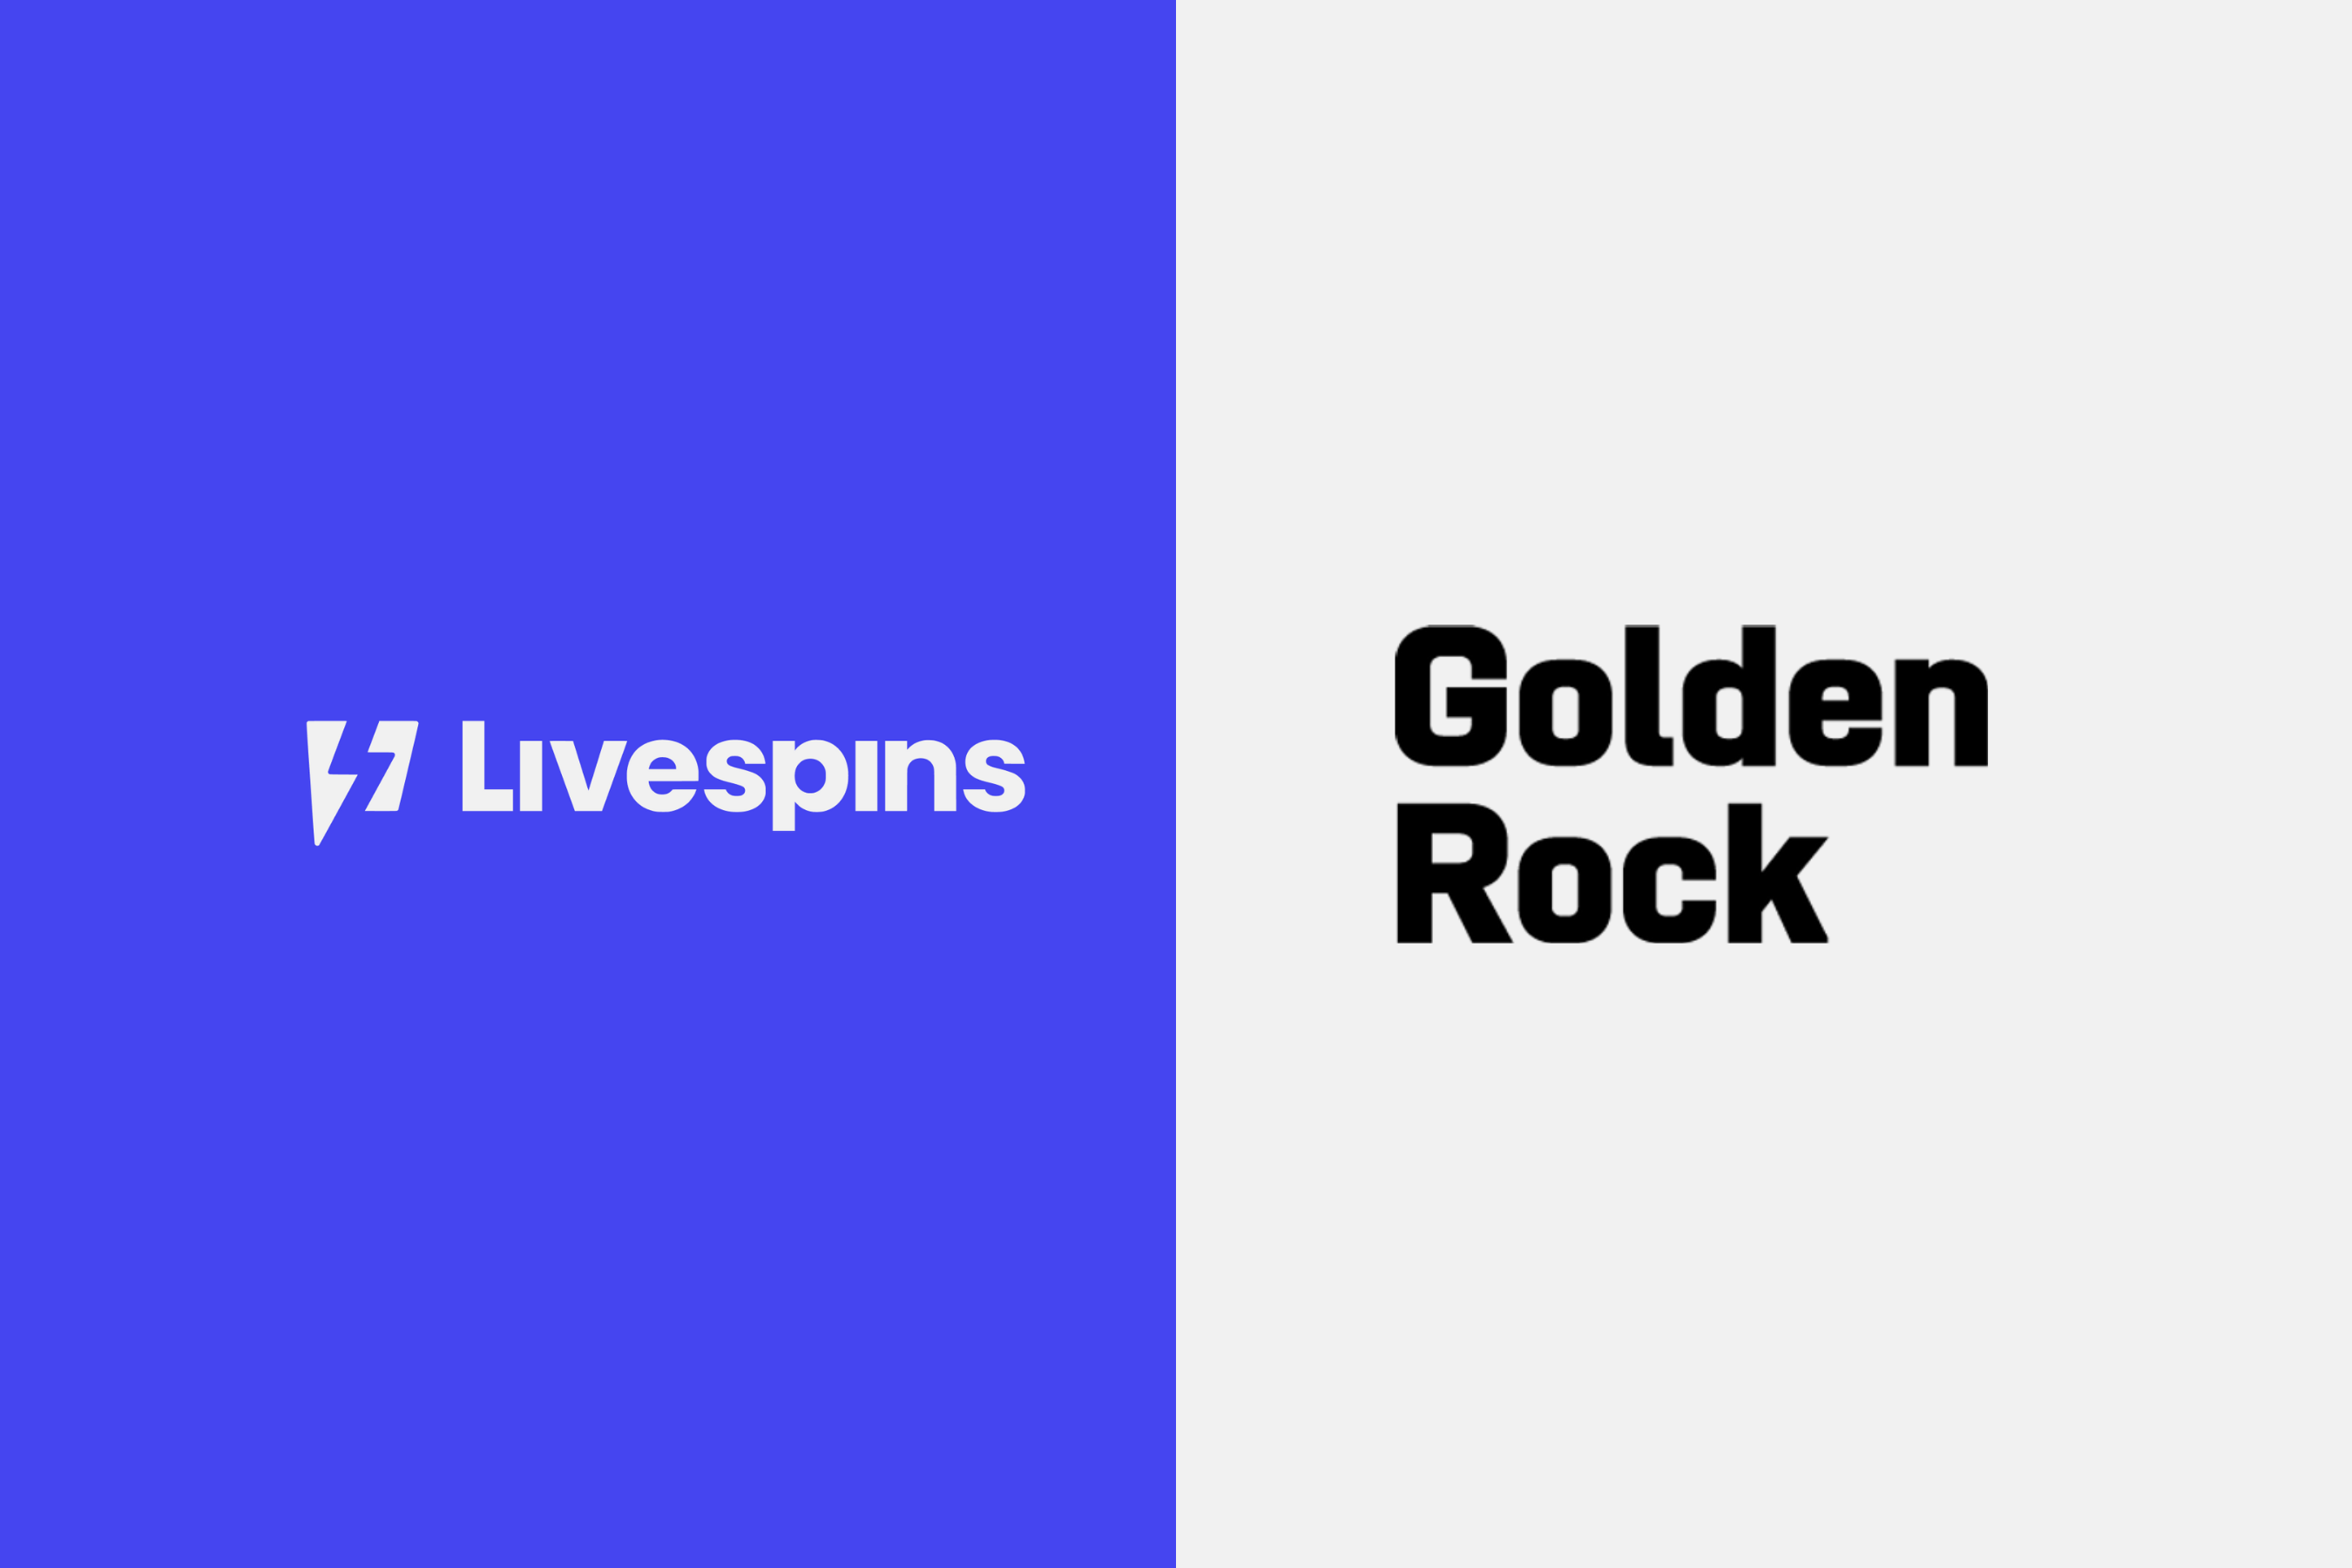 Gold standard: Livespins joins forces with Golden Rock